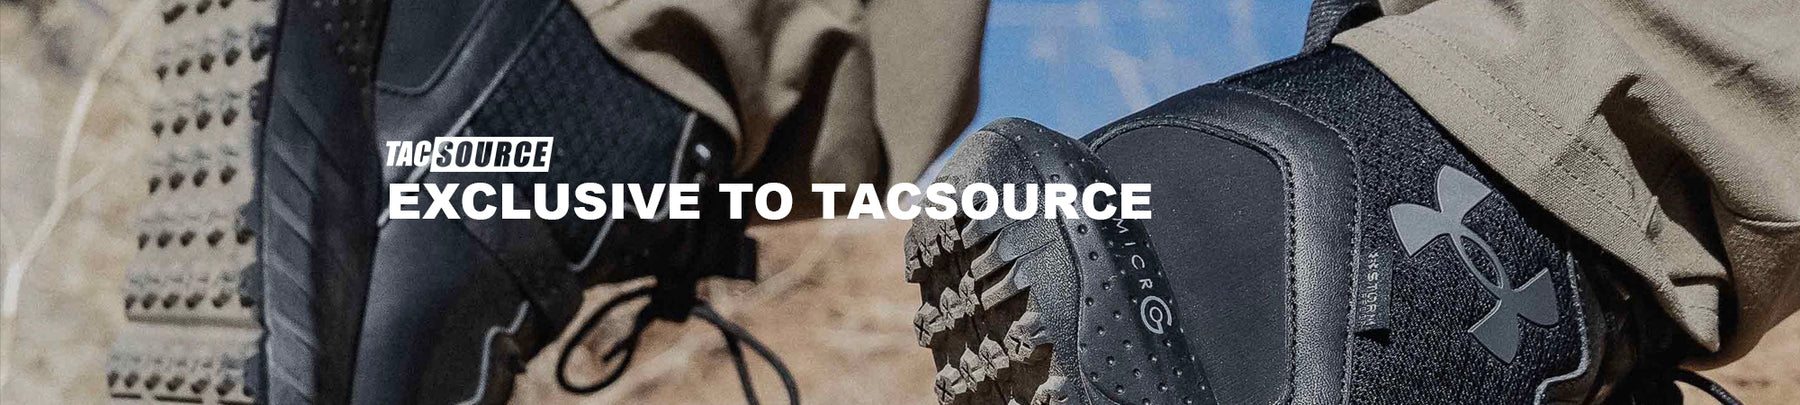 Exclusive To TacSource